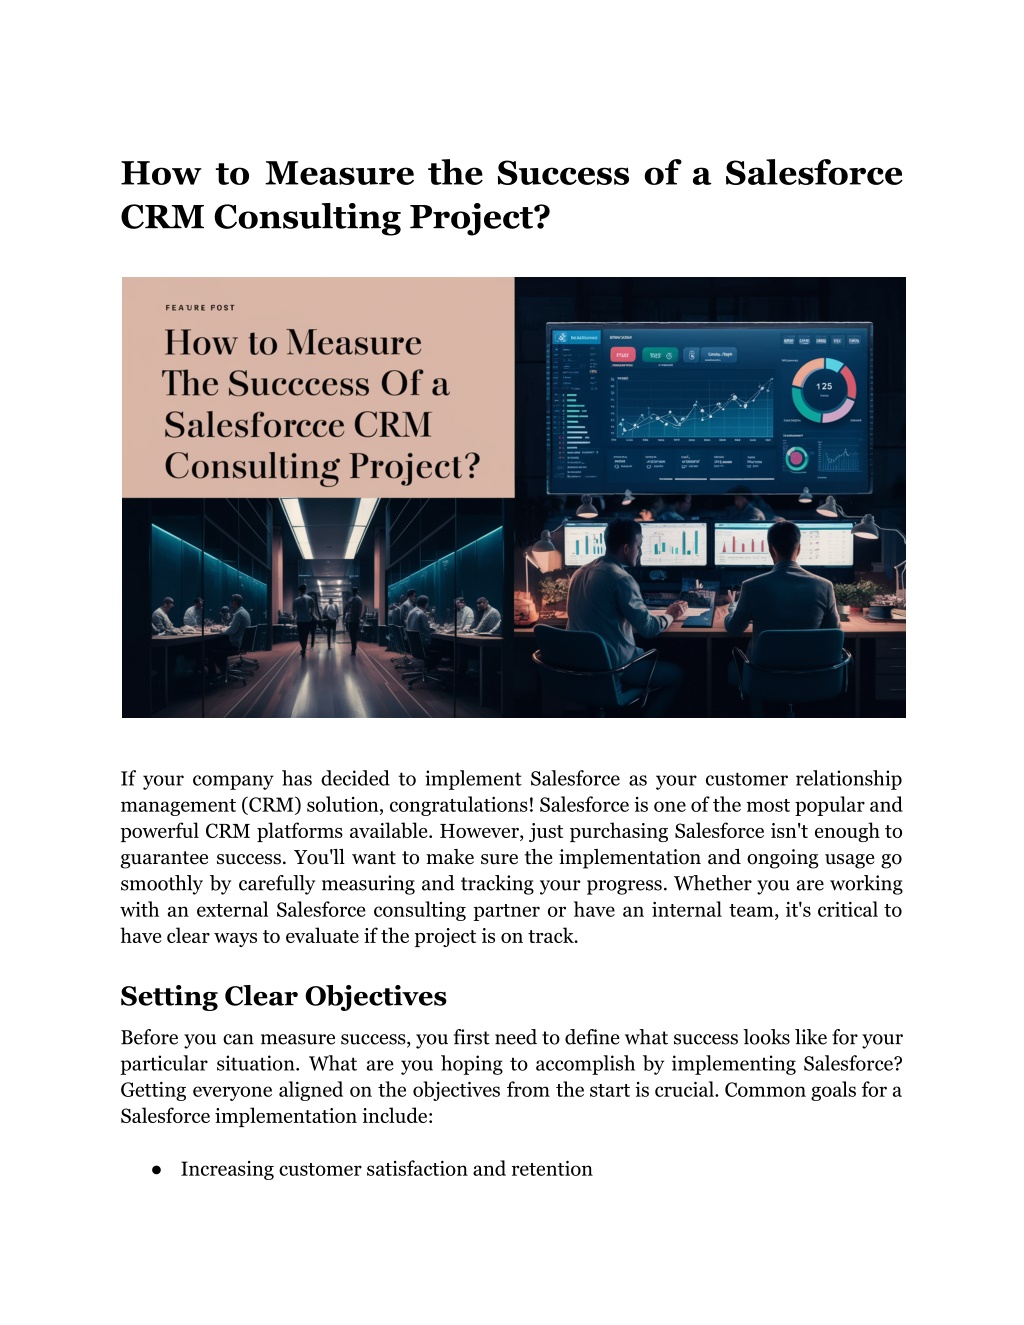 how to measure the success of a salesforce l.w